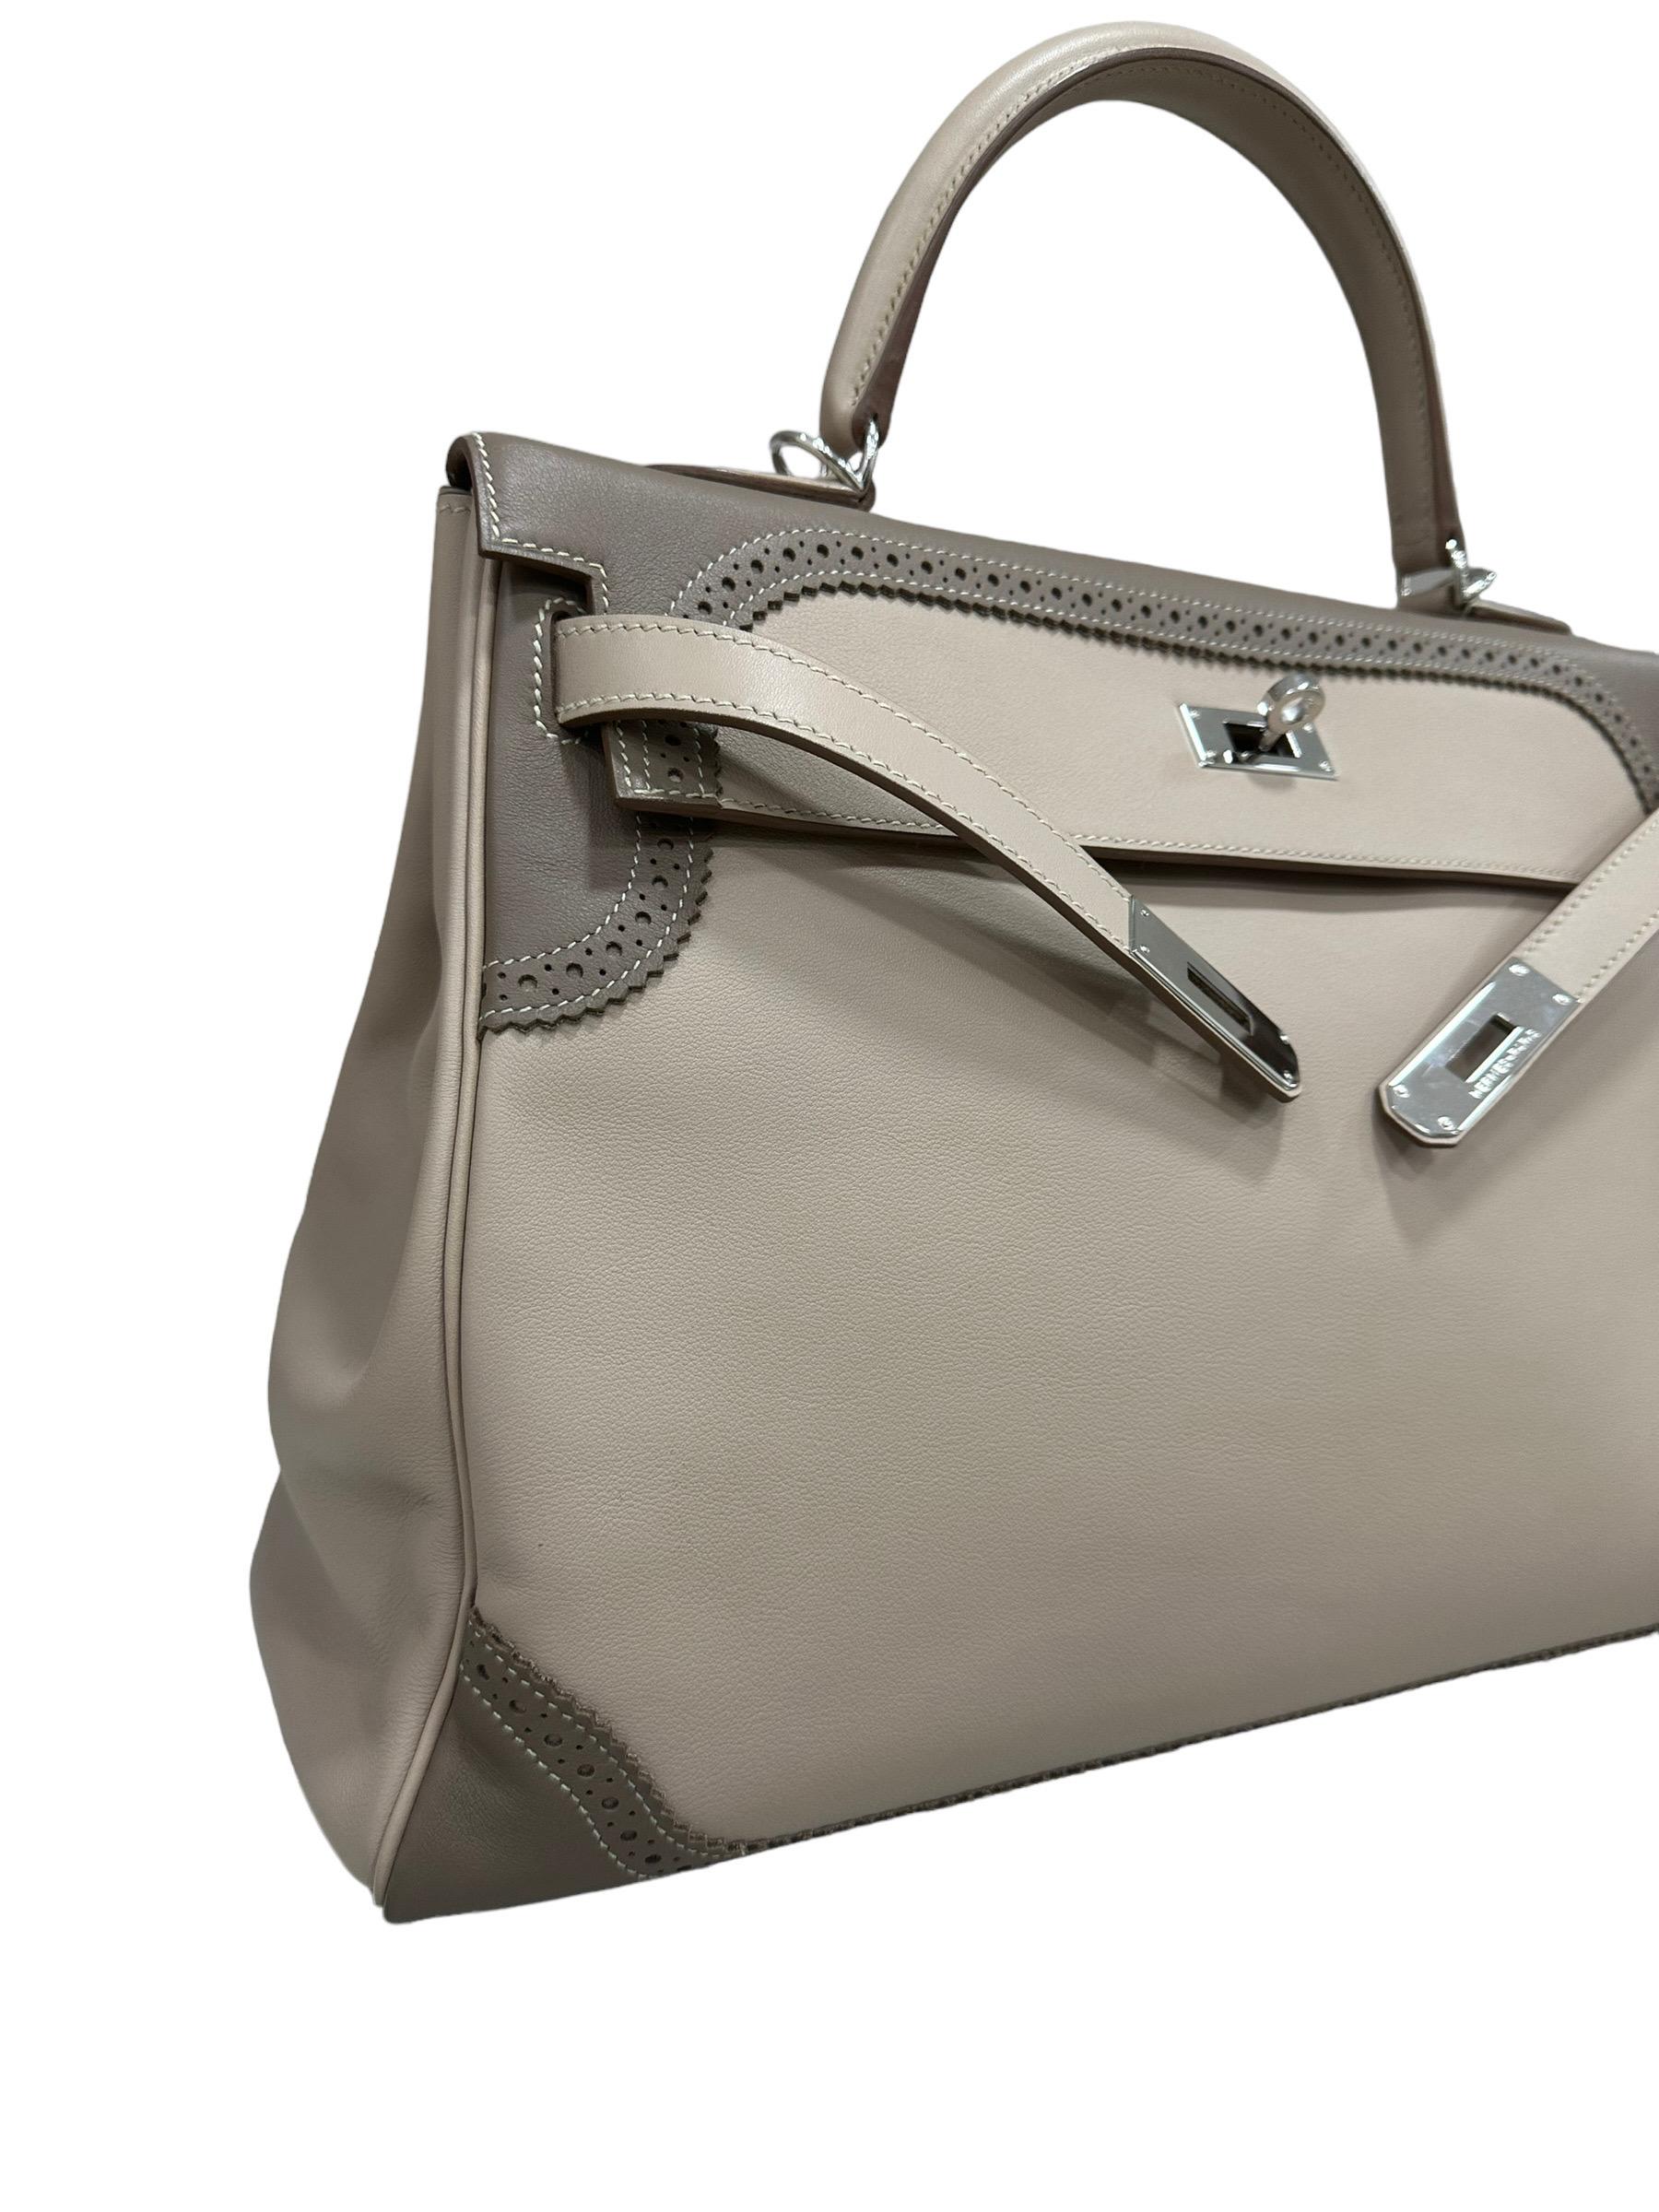 2012 Hermès Kelly 35 Ghillies Evercalf Craie/Taupe For Sale 6